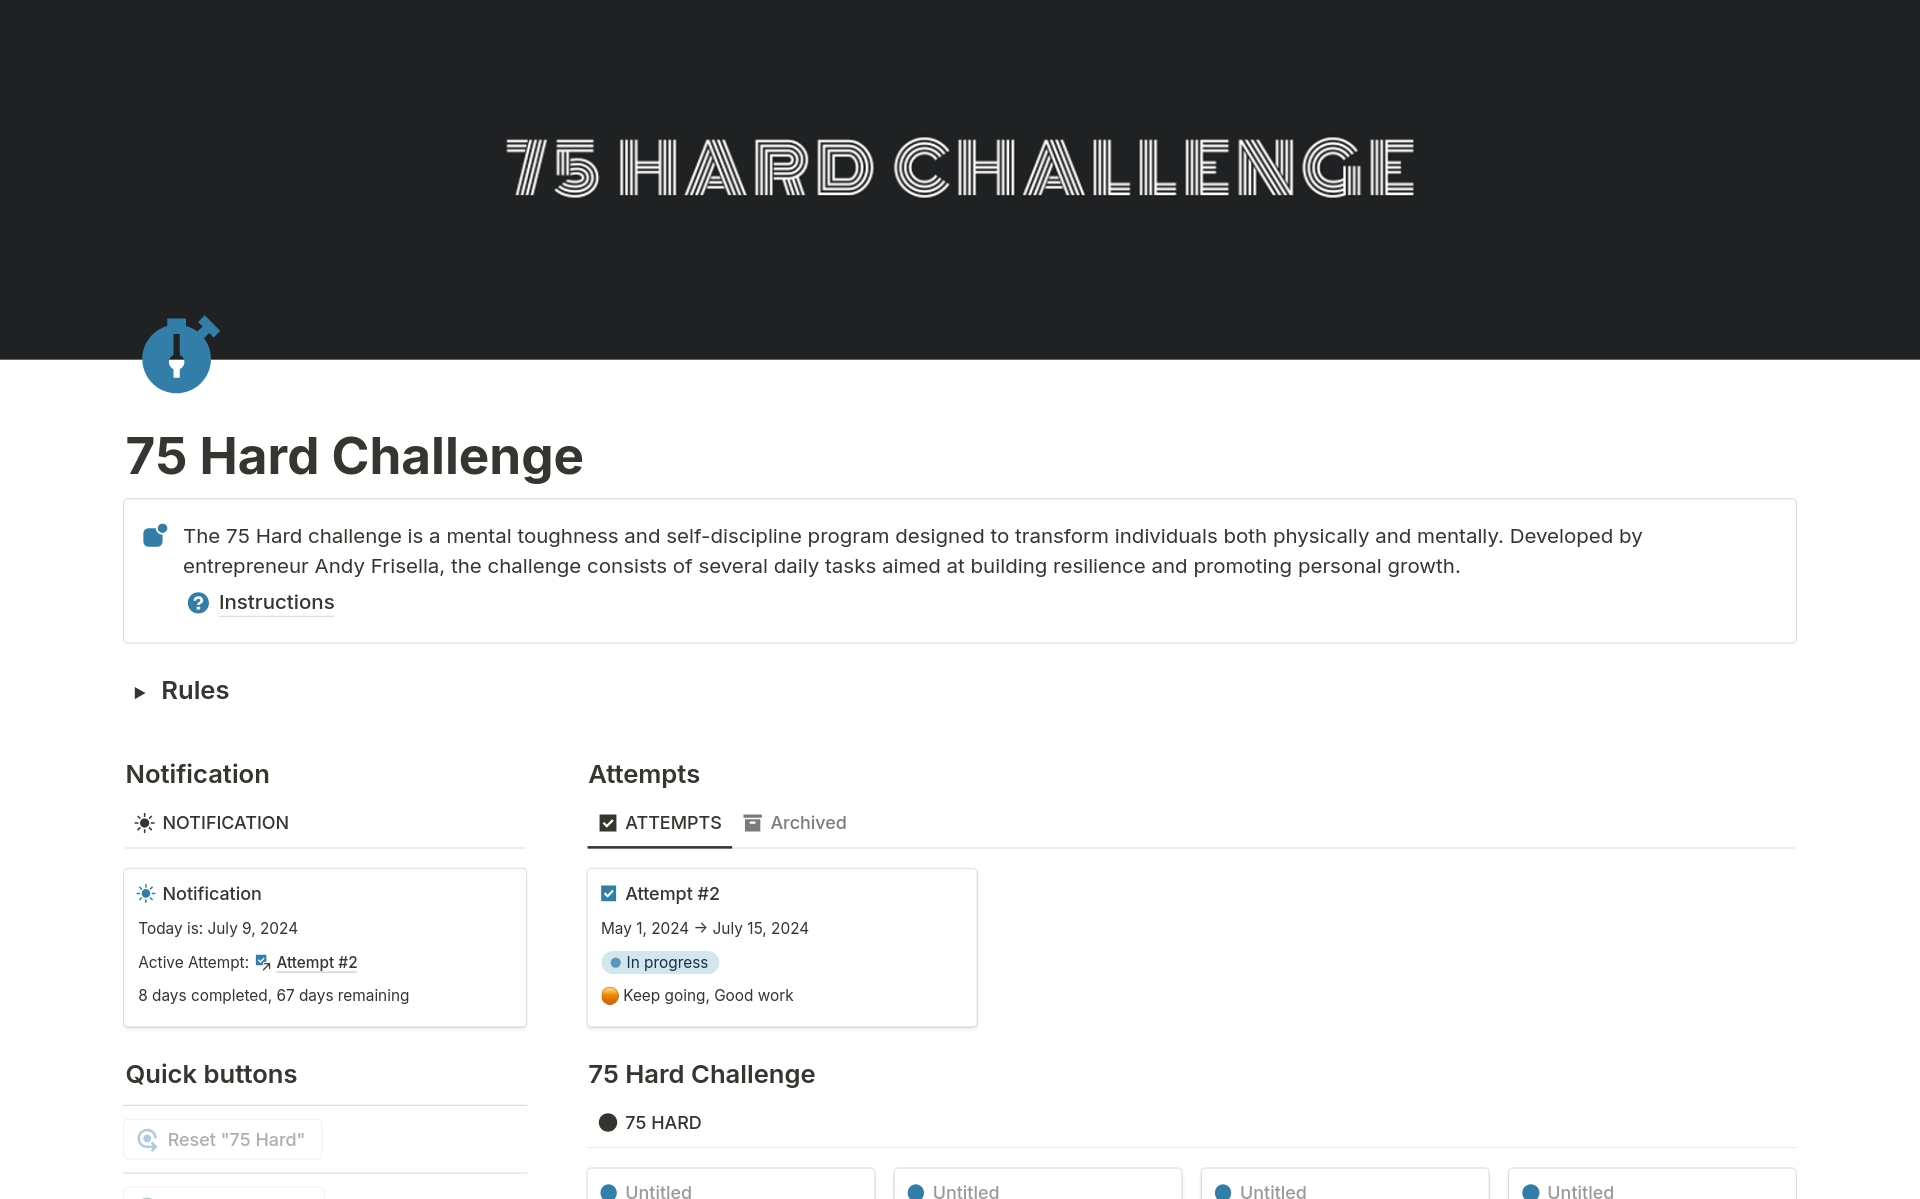 The 75 Hard challenge is a mental toughness and self-discipline program designed to transform individuals both physically & mentally. Developed by entrepreneur Andy Frisella, the challenge consists of several daily tasks aimed at building resilience and promoting personal growth.